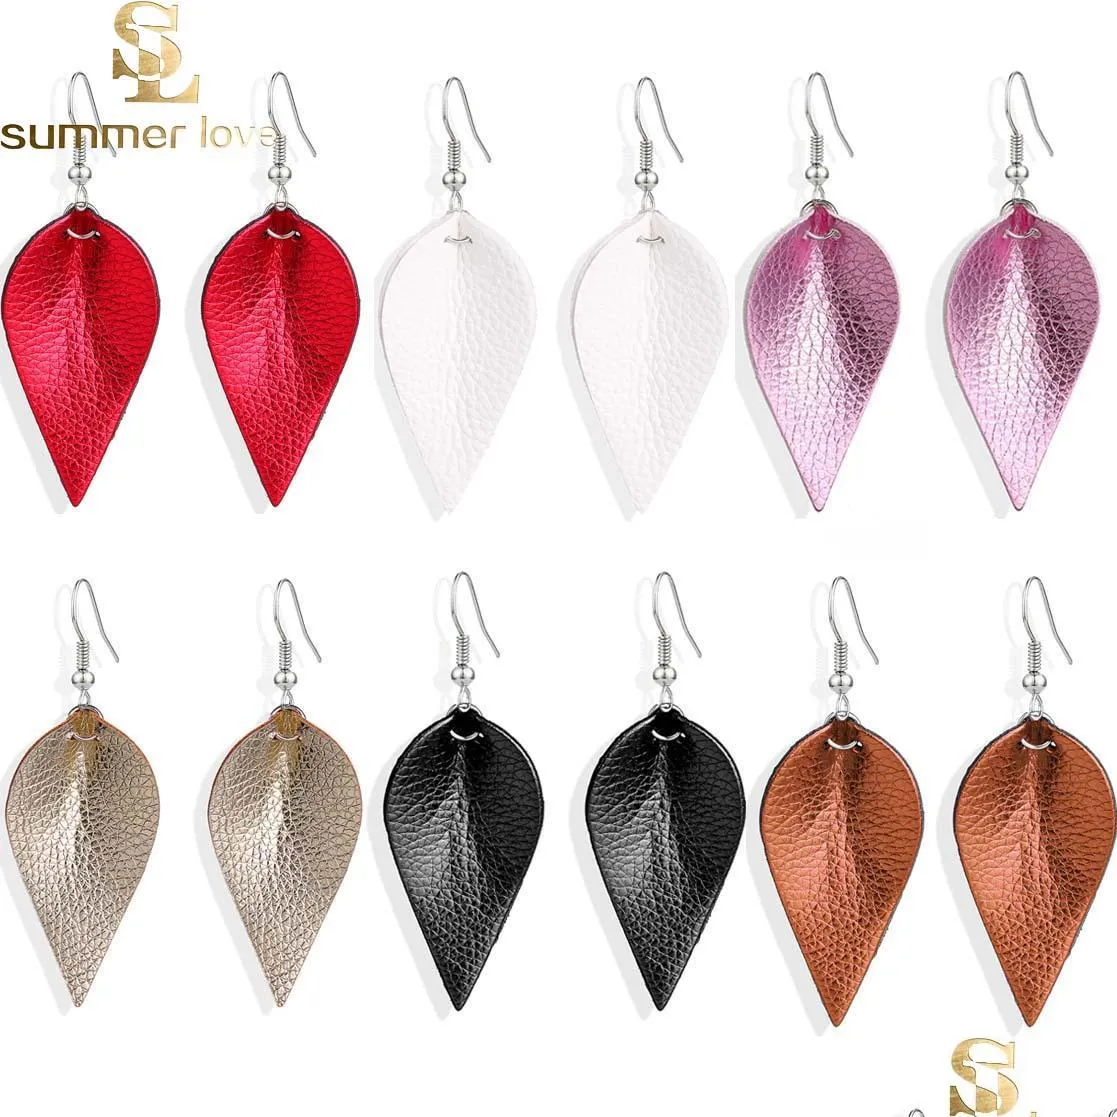  cutting leaf feather earrings pu leather sequins looking various multi colors bohemia water drop dangle earrings fashion jewelry